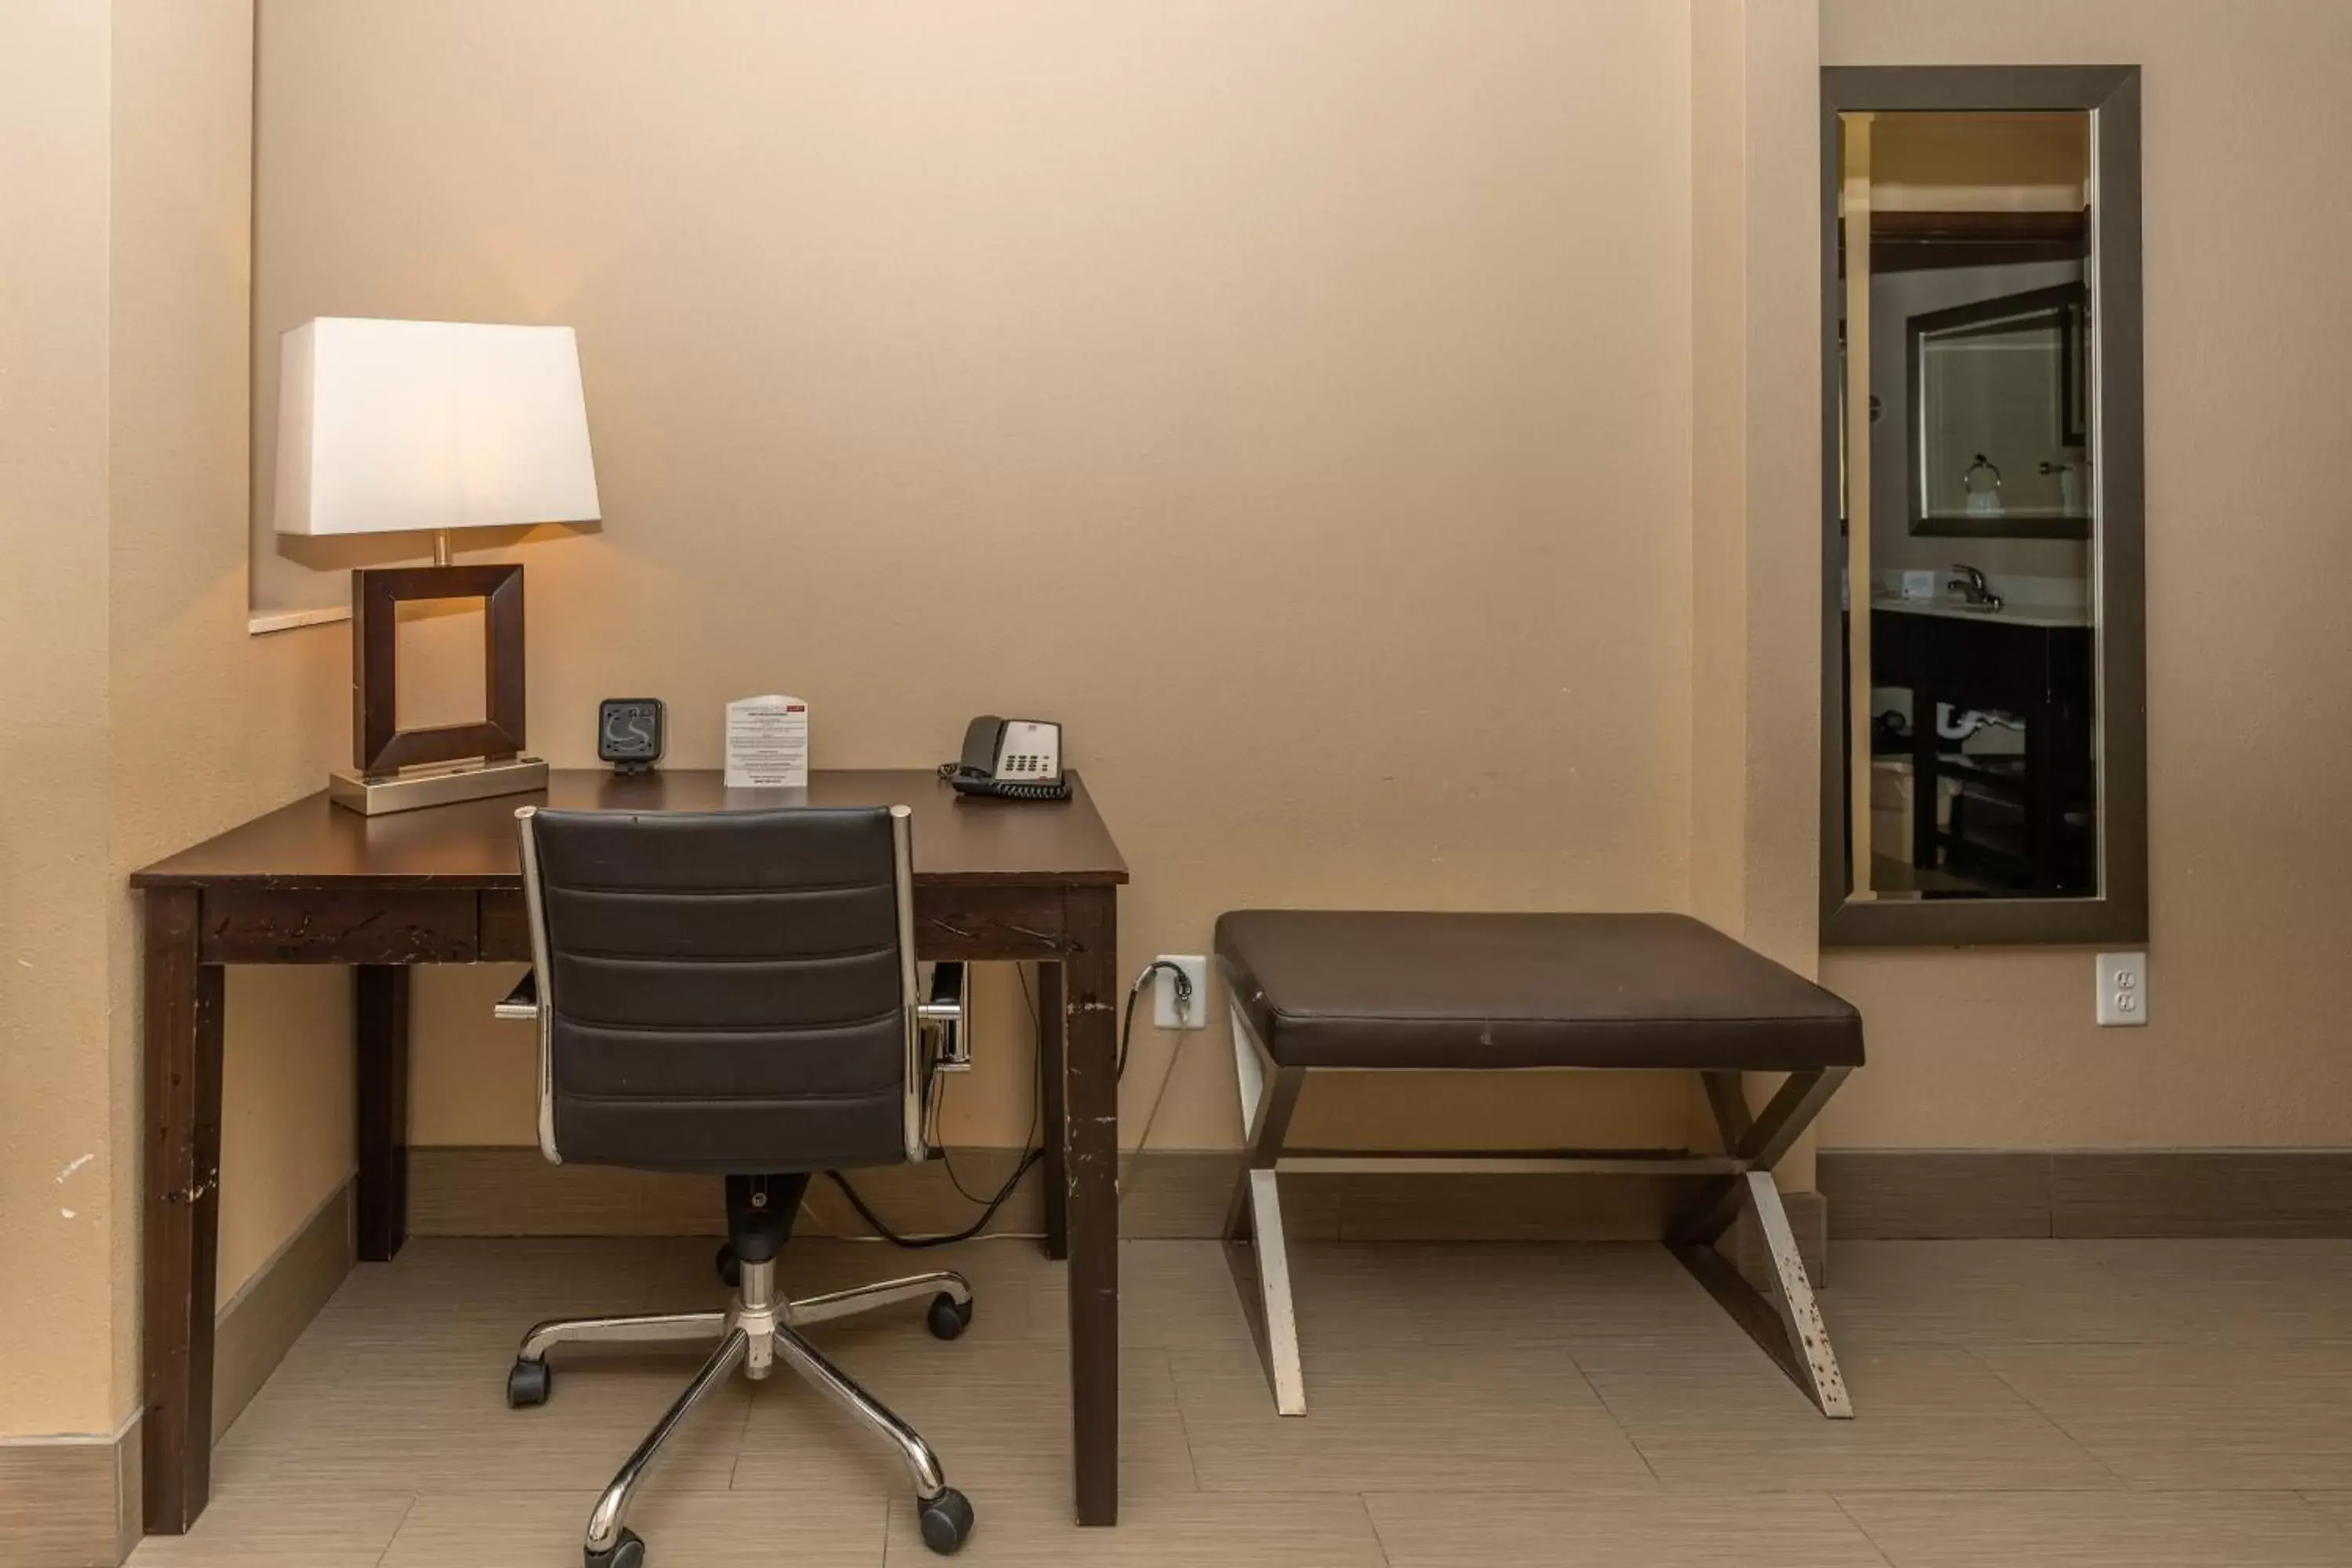 Business facilities in Comfort Suites Houston West At Clay Road